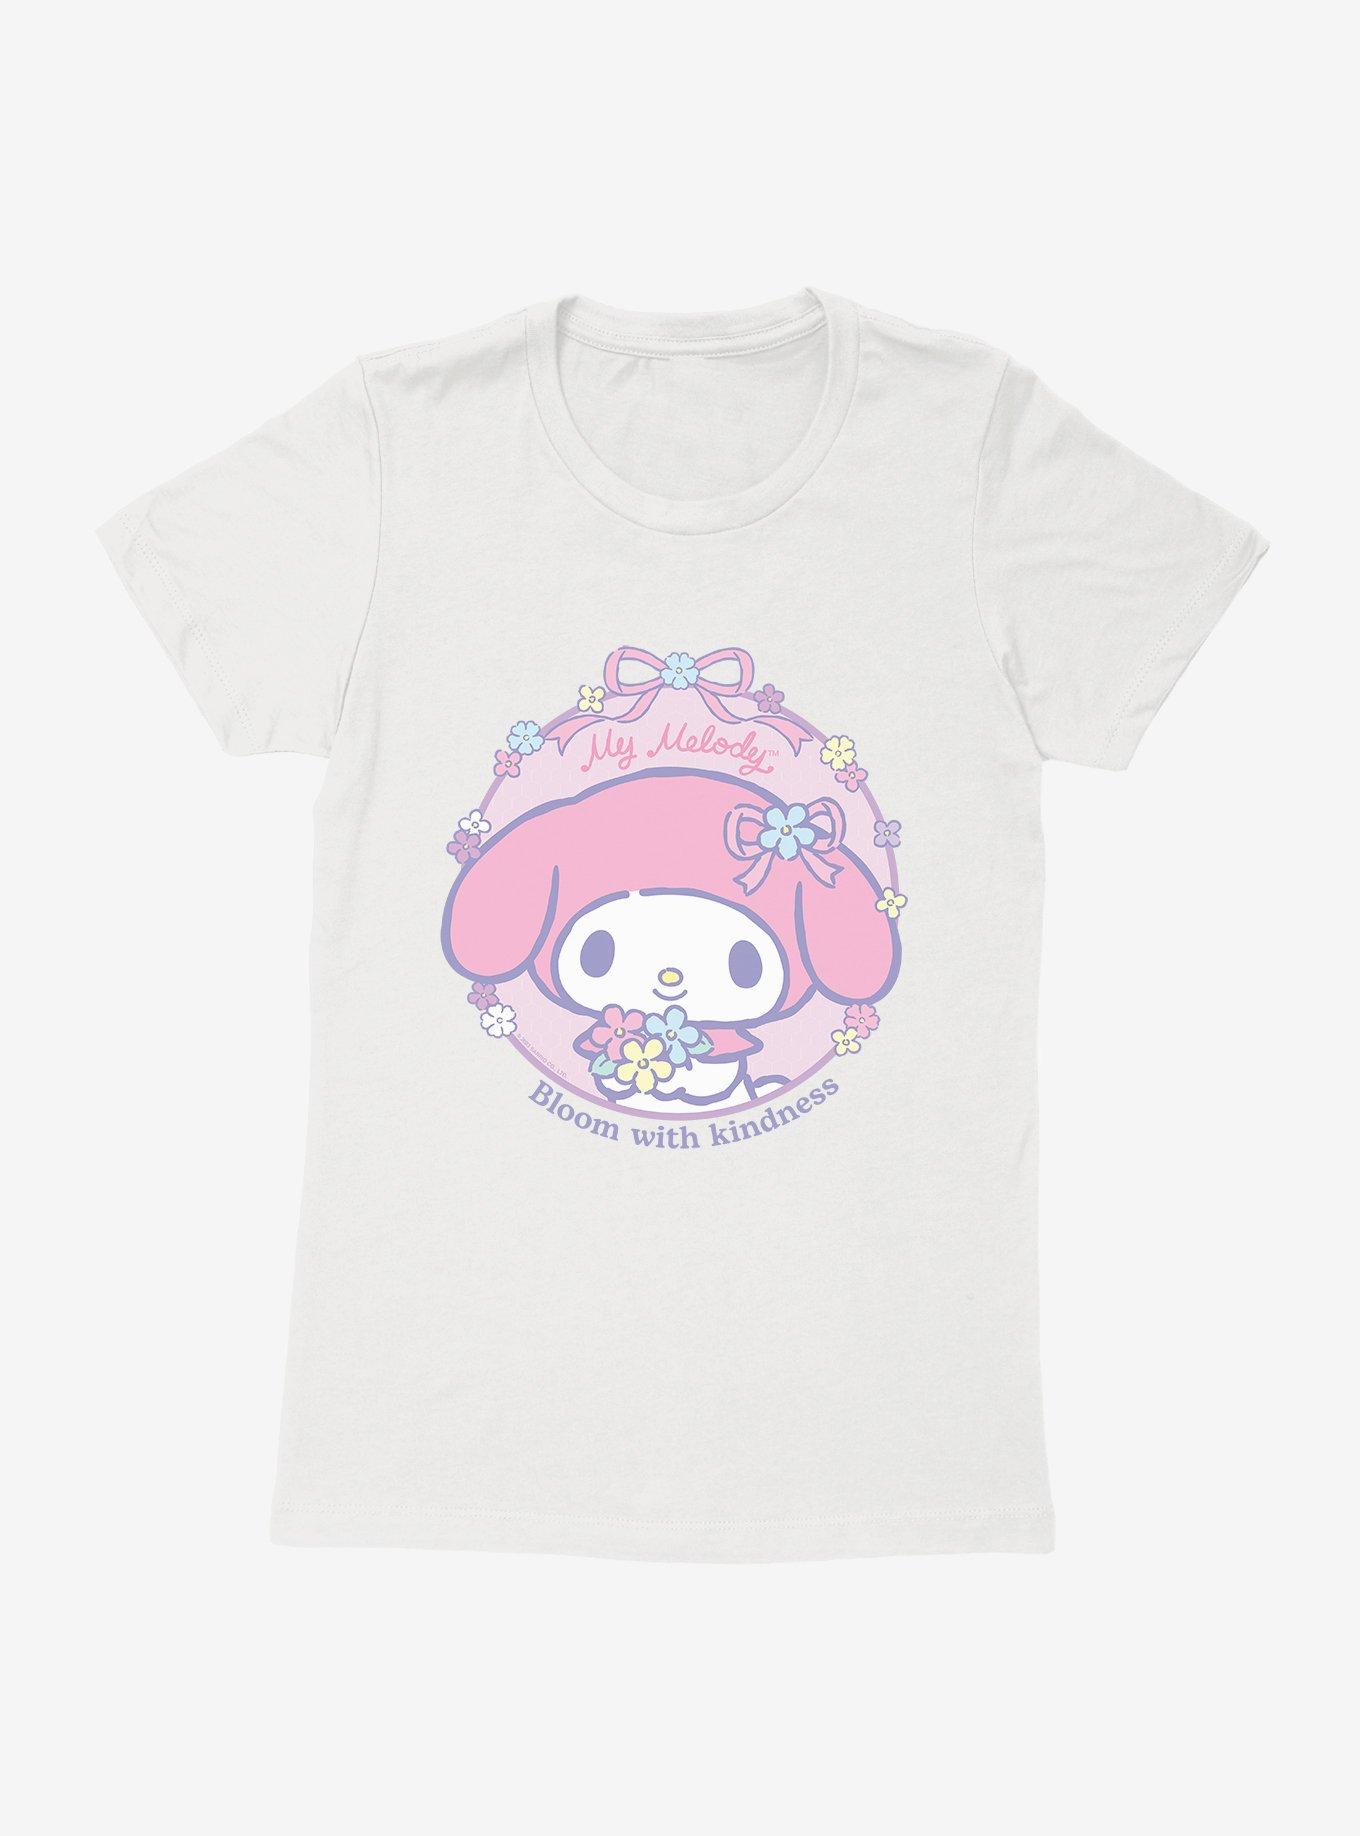 My Melody Bloom With Kindness Womens T-Shirt, WHITE, hi-res